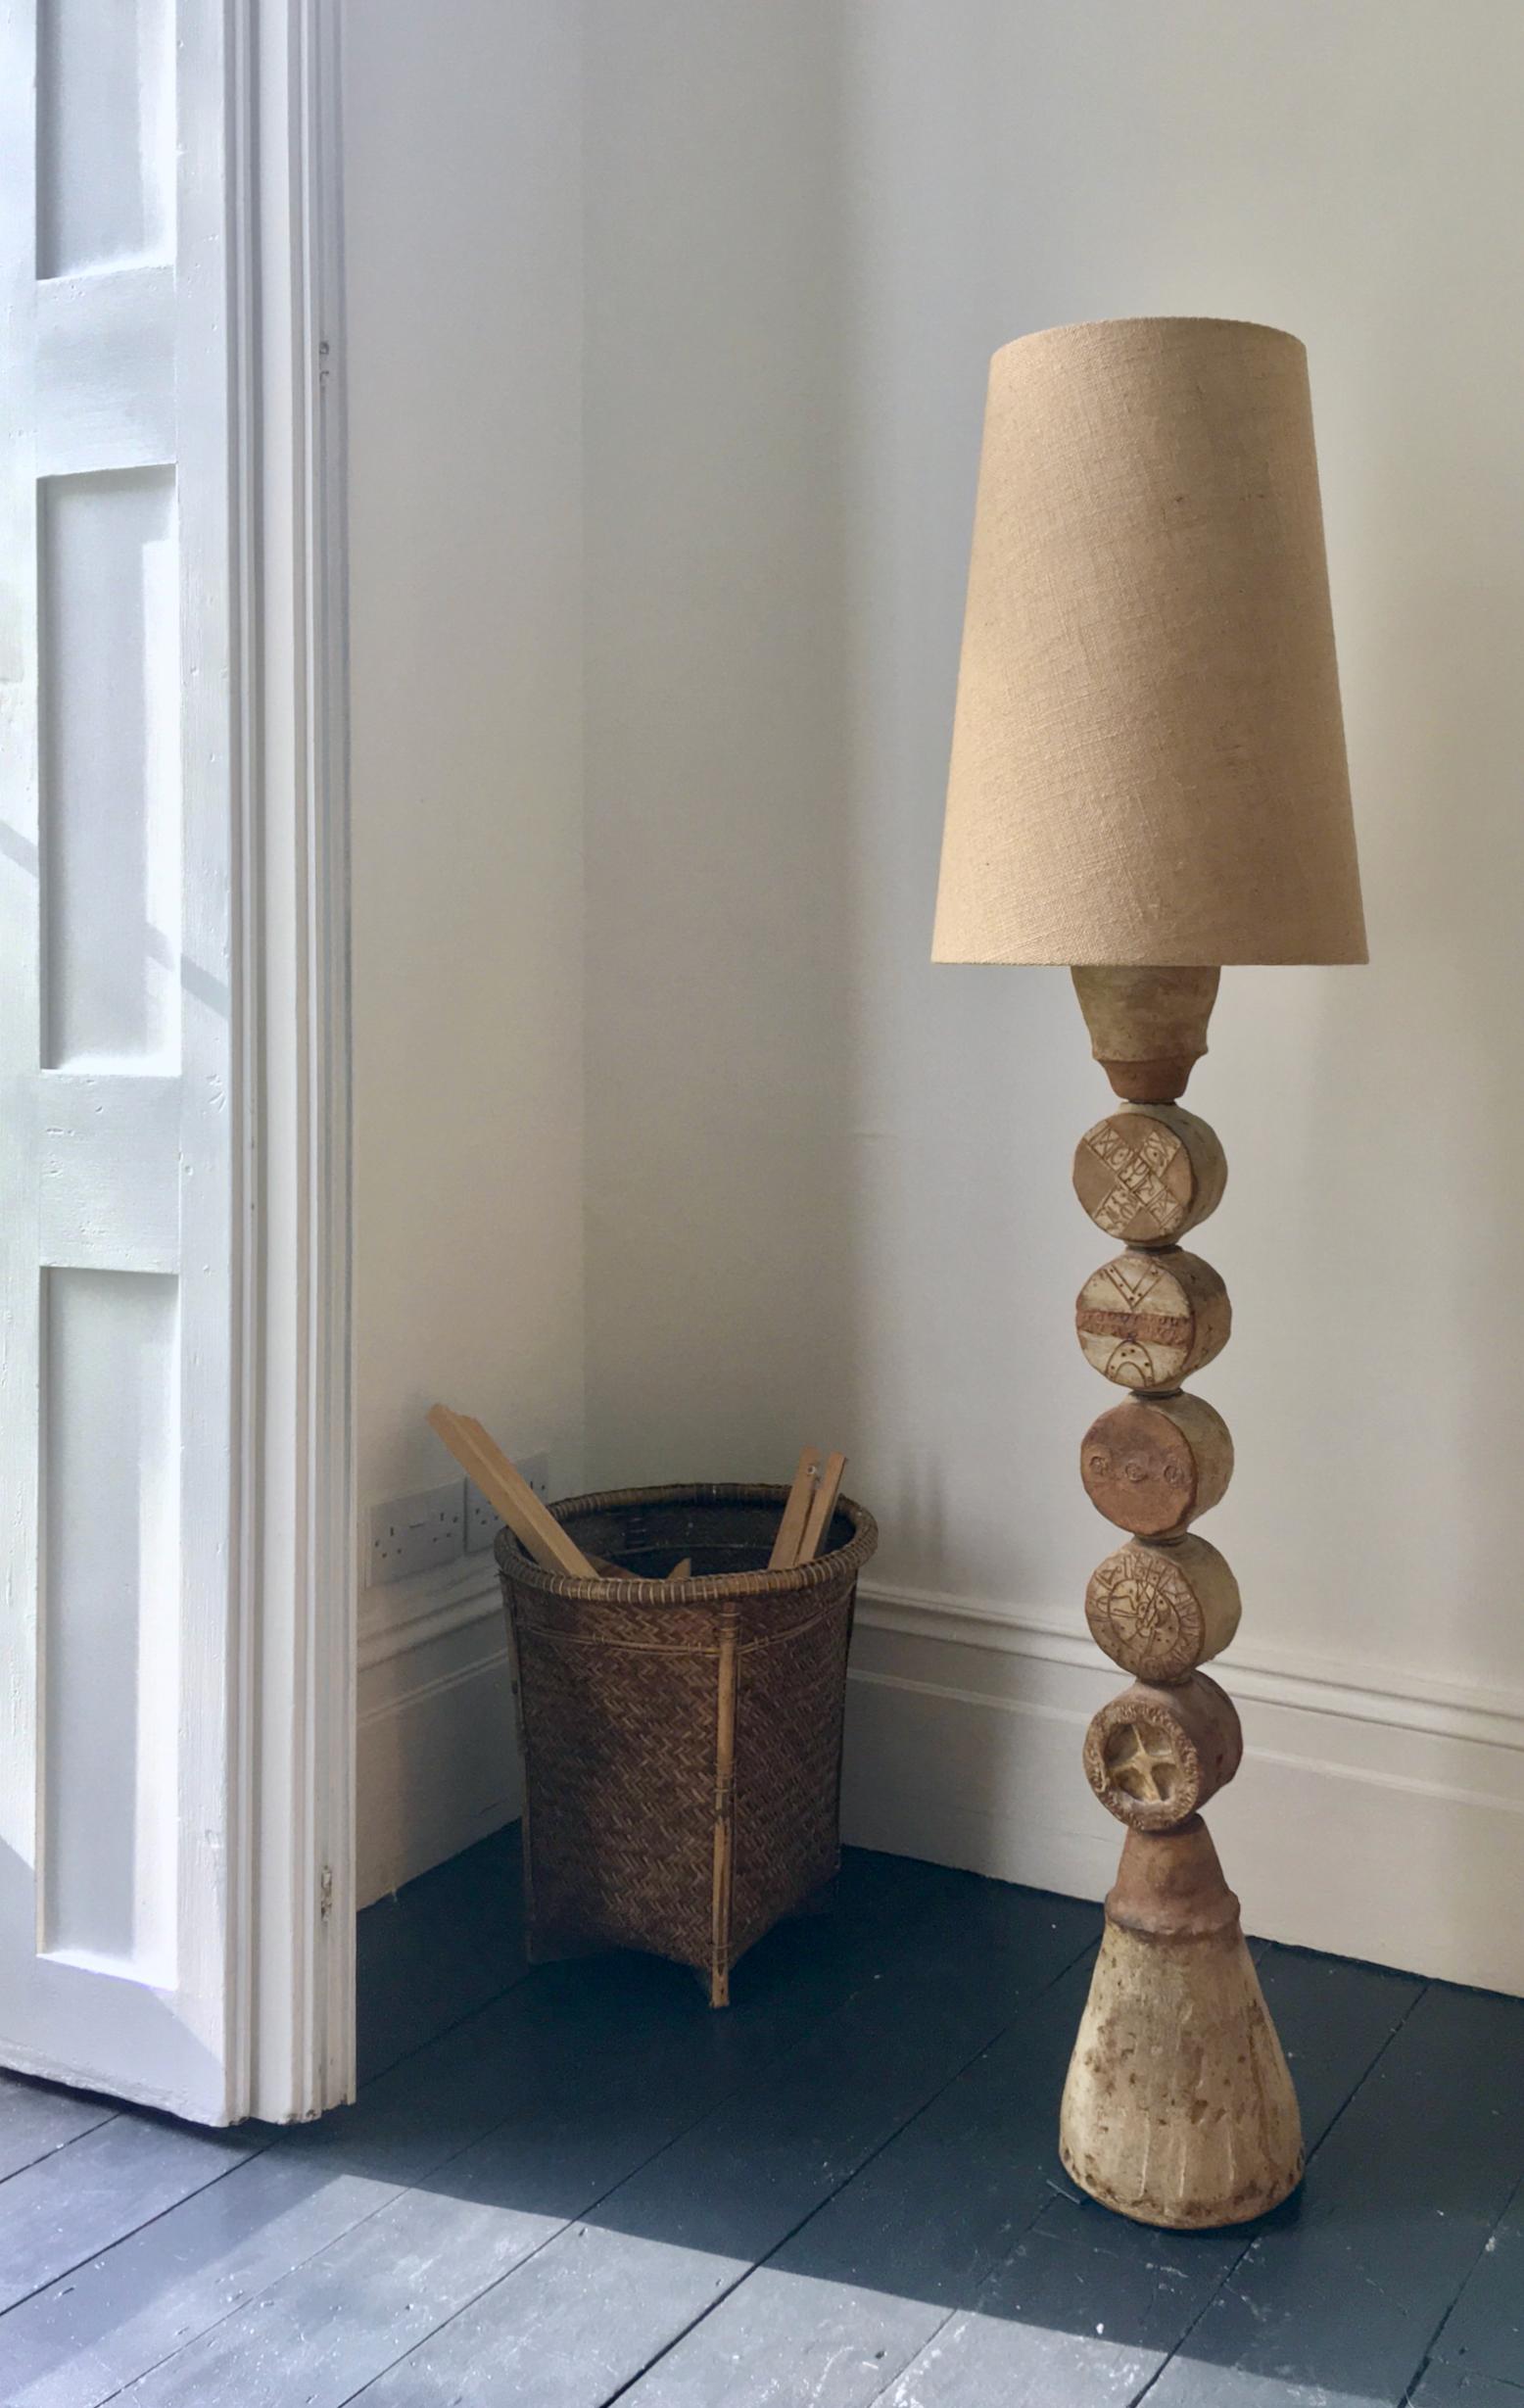 A monumental ceramic TOTEM floor lamp by Bernard Rooke, mid-20th century England.

A beautiful sculptural piece, made up of ceramic elements in natural tones of terracotta and stone. A very unusual model with a large cone-shaped base; each of the